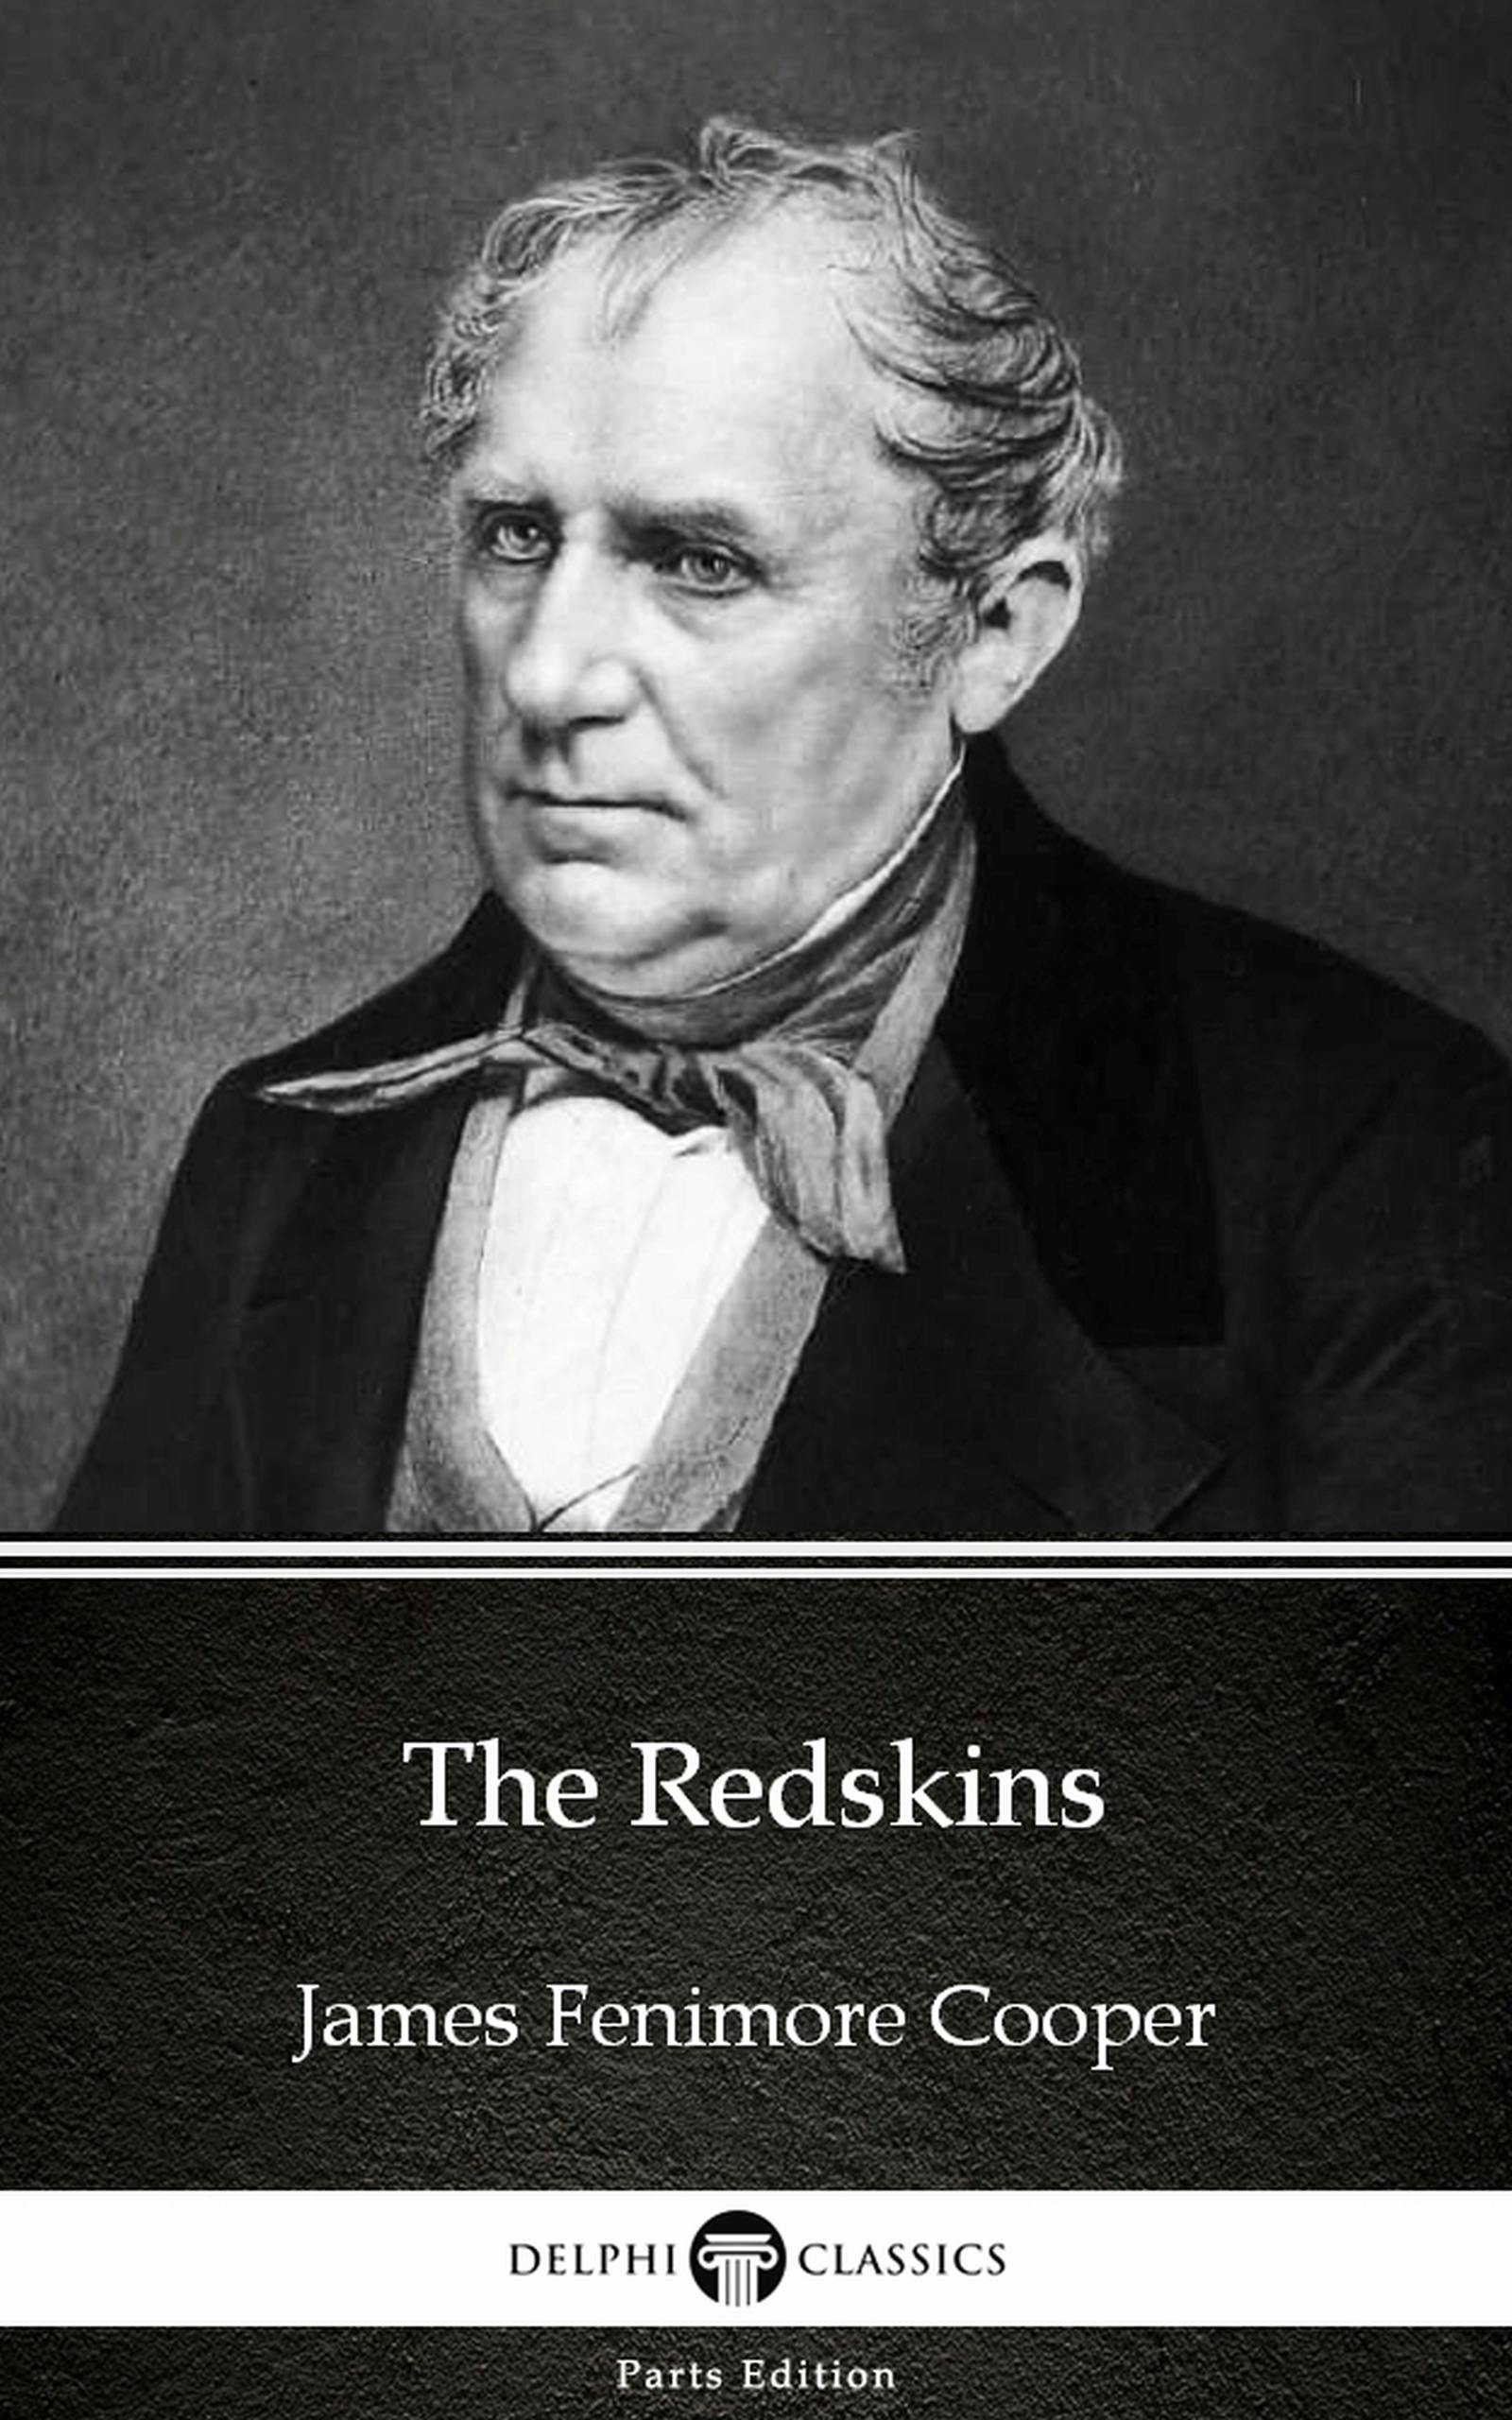 The Redskins by James Fenimore Cooper - Delphi Classics (Illustrated) - James Fenimore Cooper